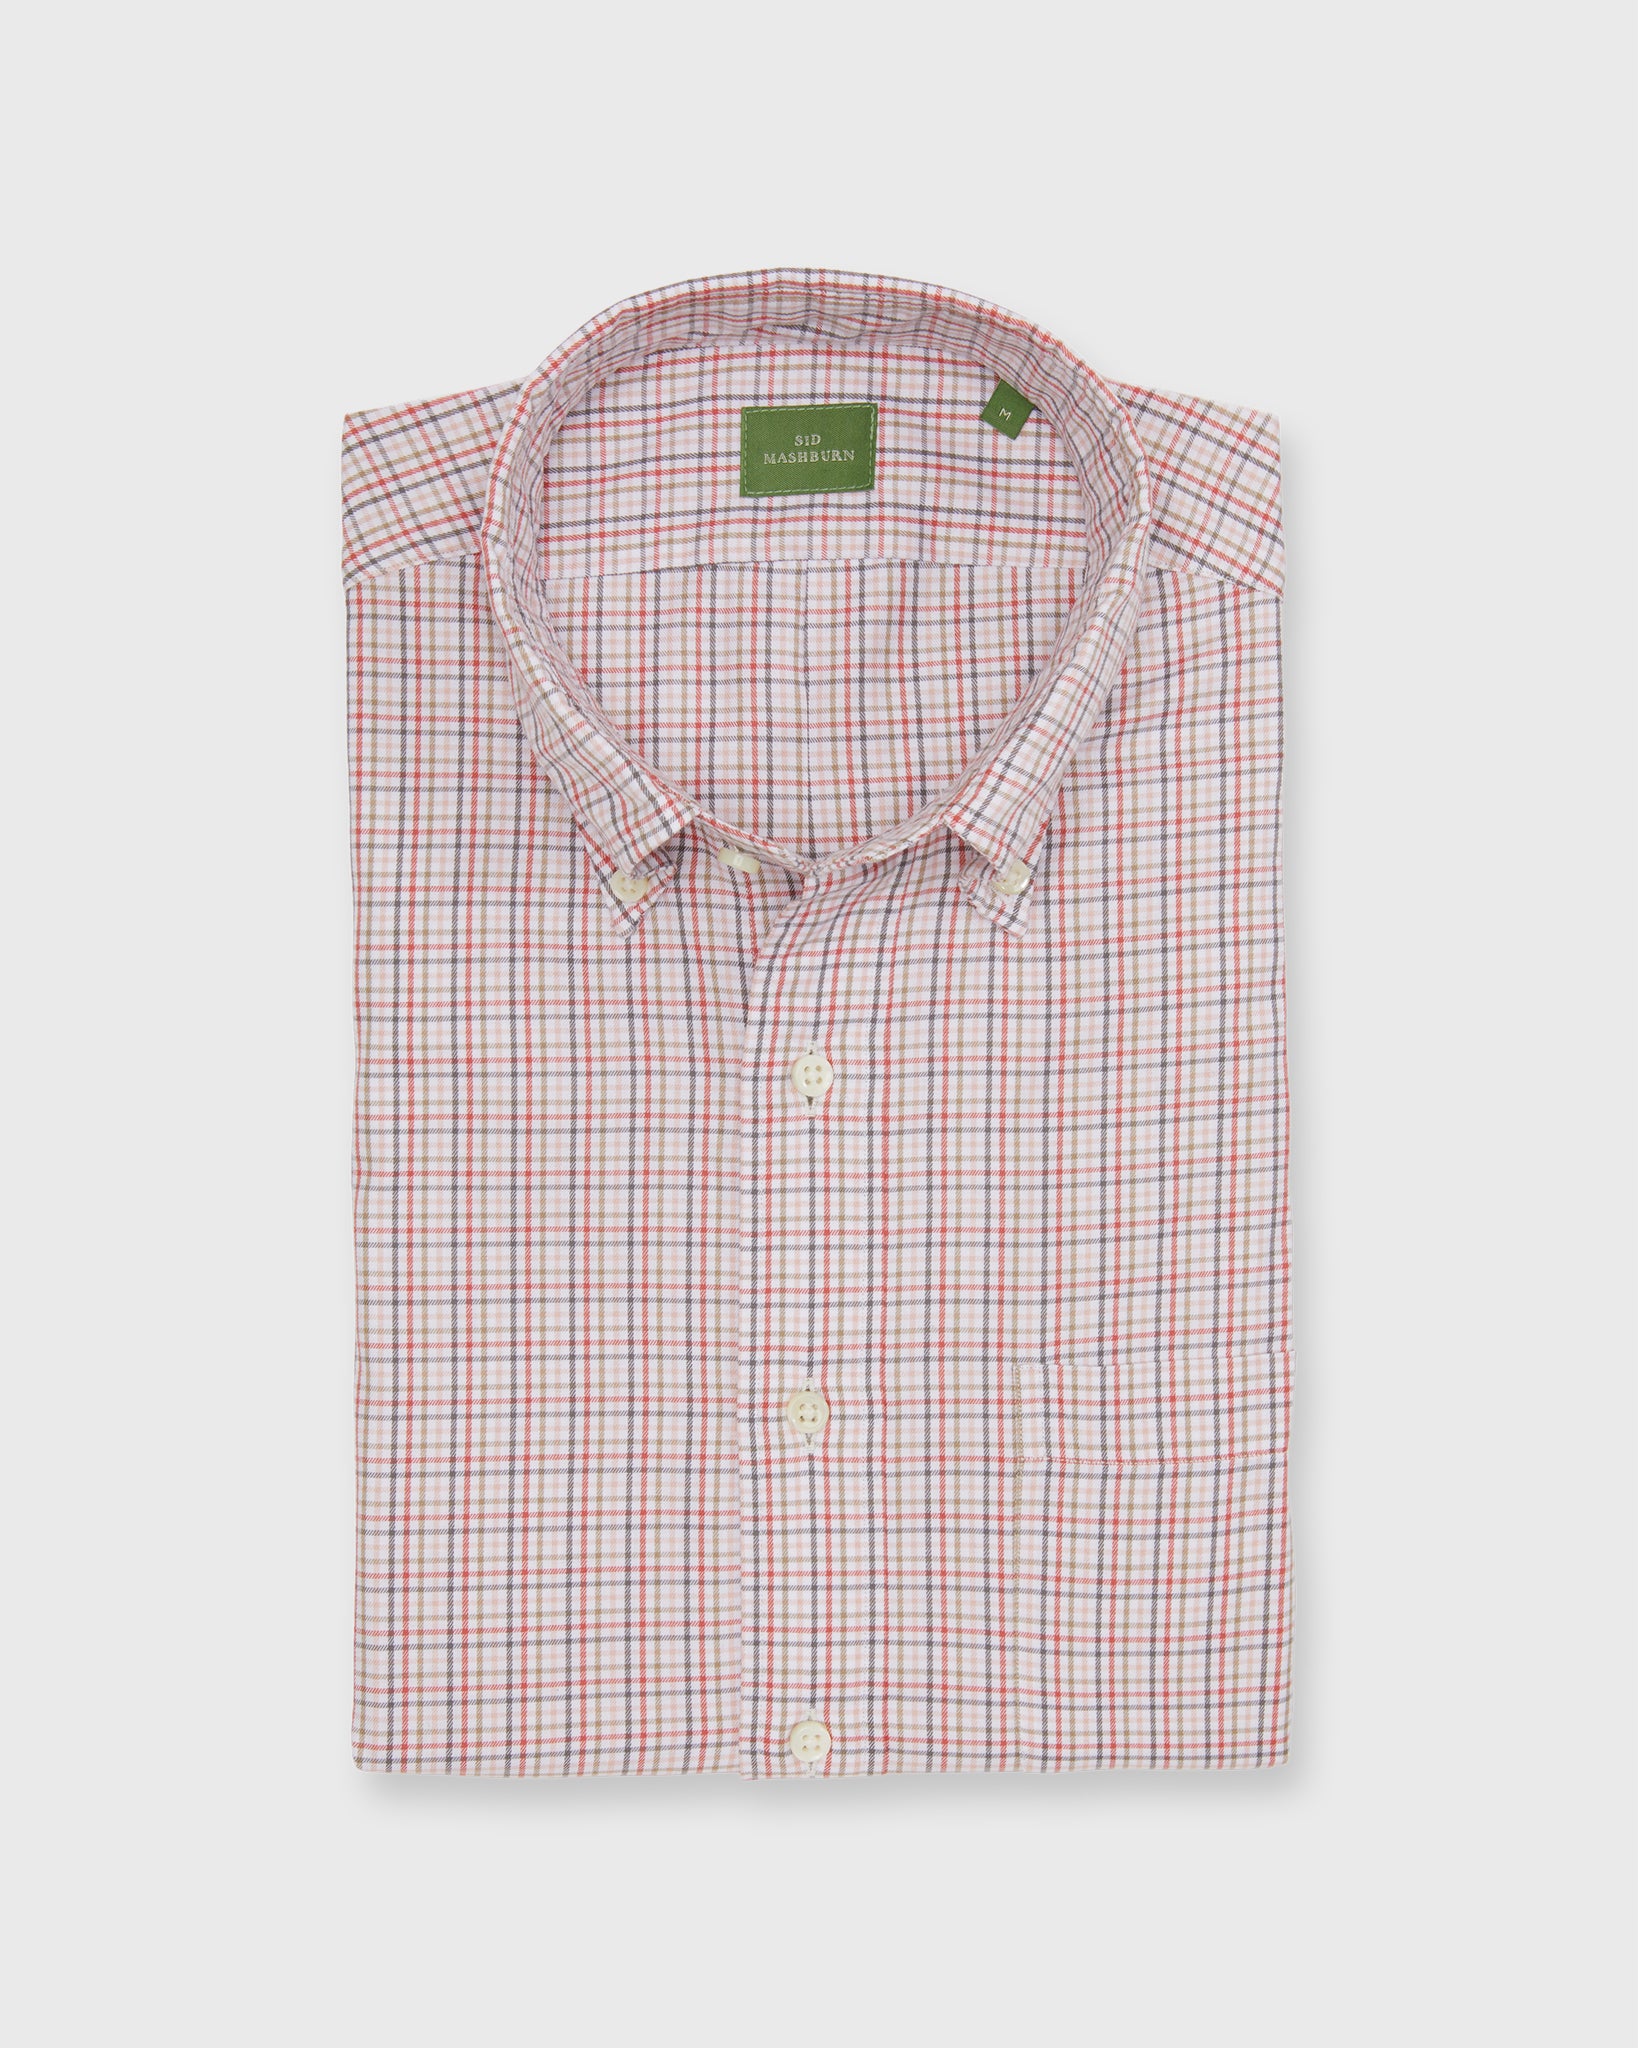 Button-Down Sport Shirt in Bone/Coral/Olive Tattersall Twill